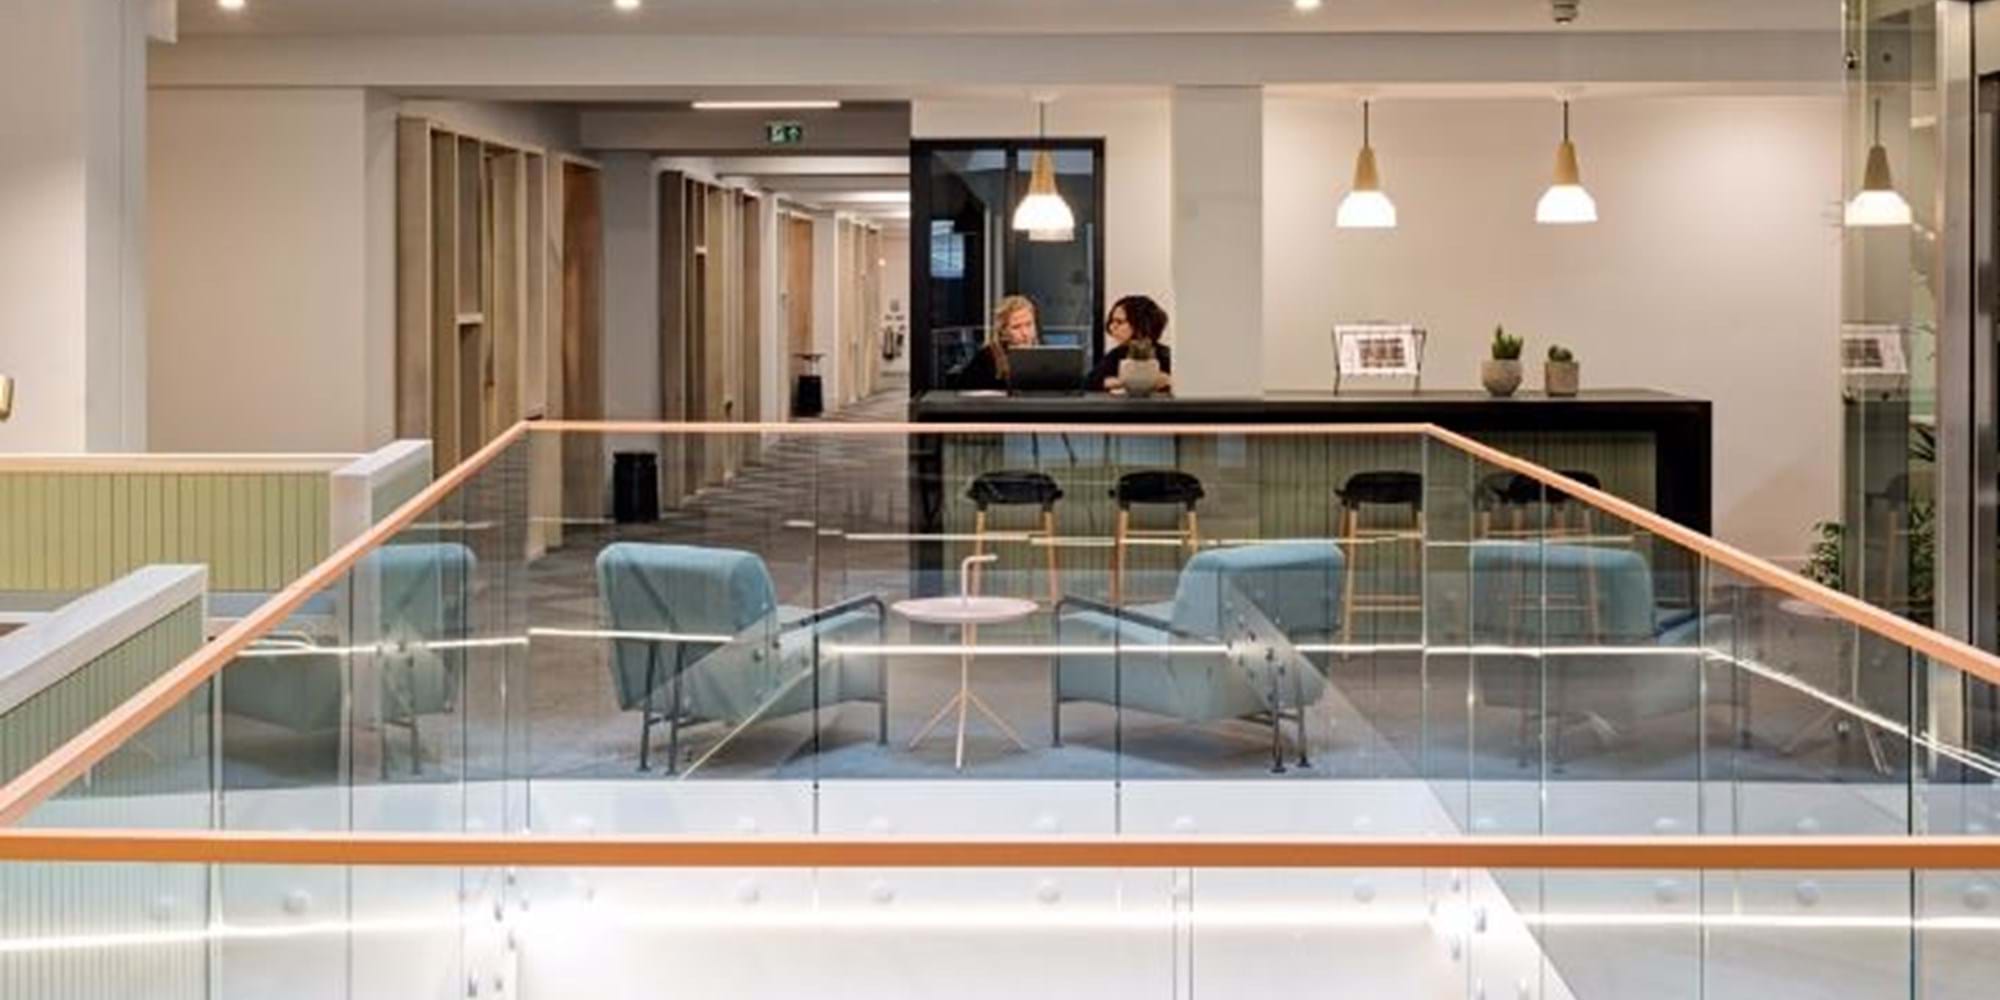 Modus Workspace office design, fit out and refurbishment - TOG - Wimpole Street - TOG Wimpole St 17 highres sRGB.jpg